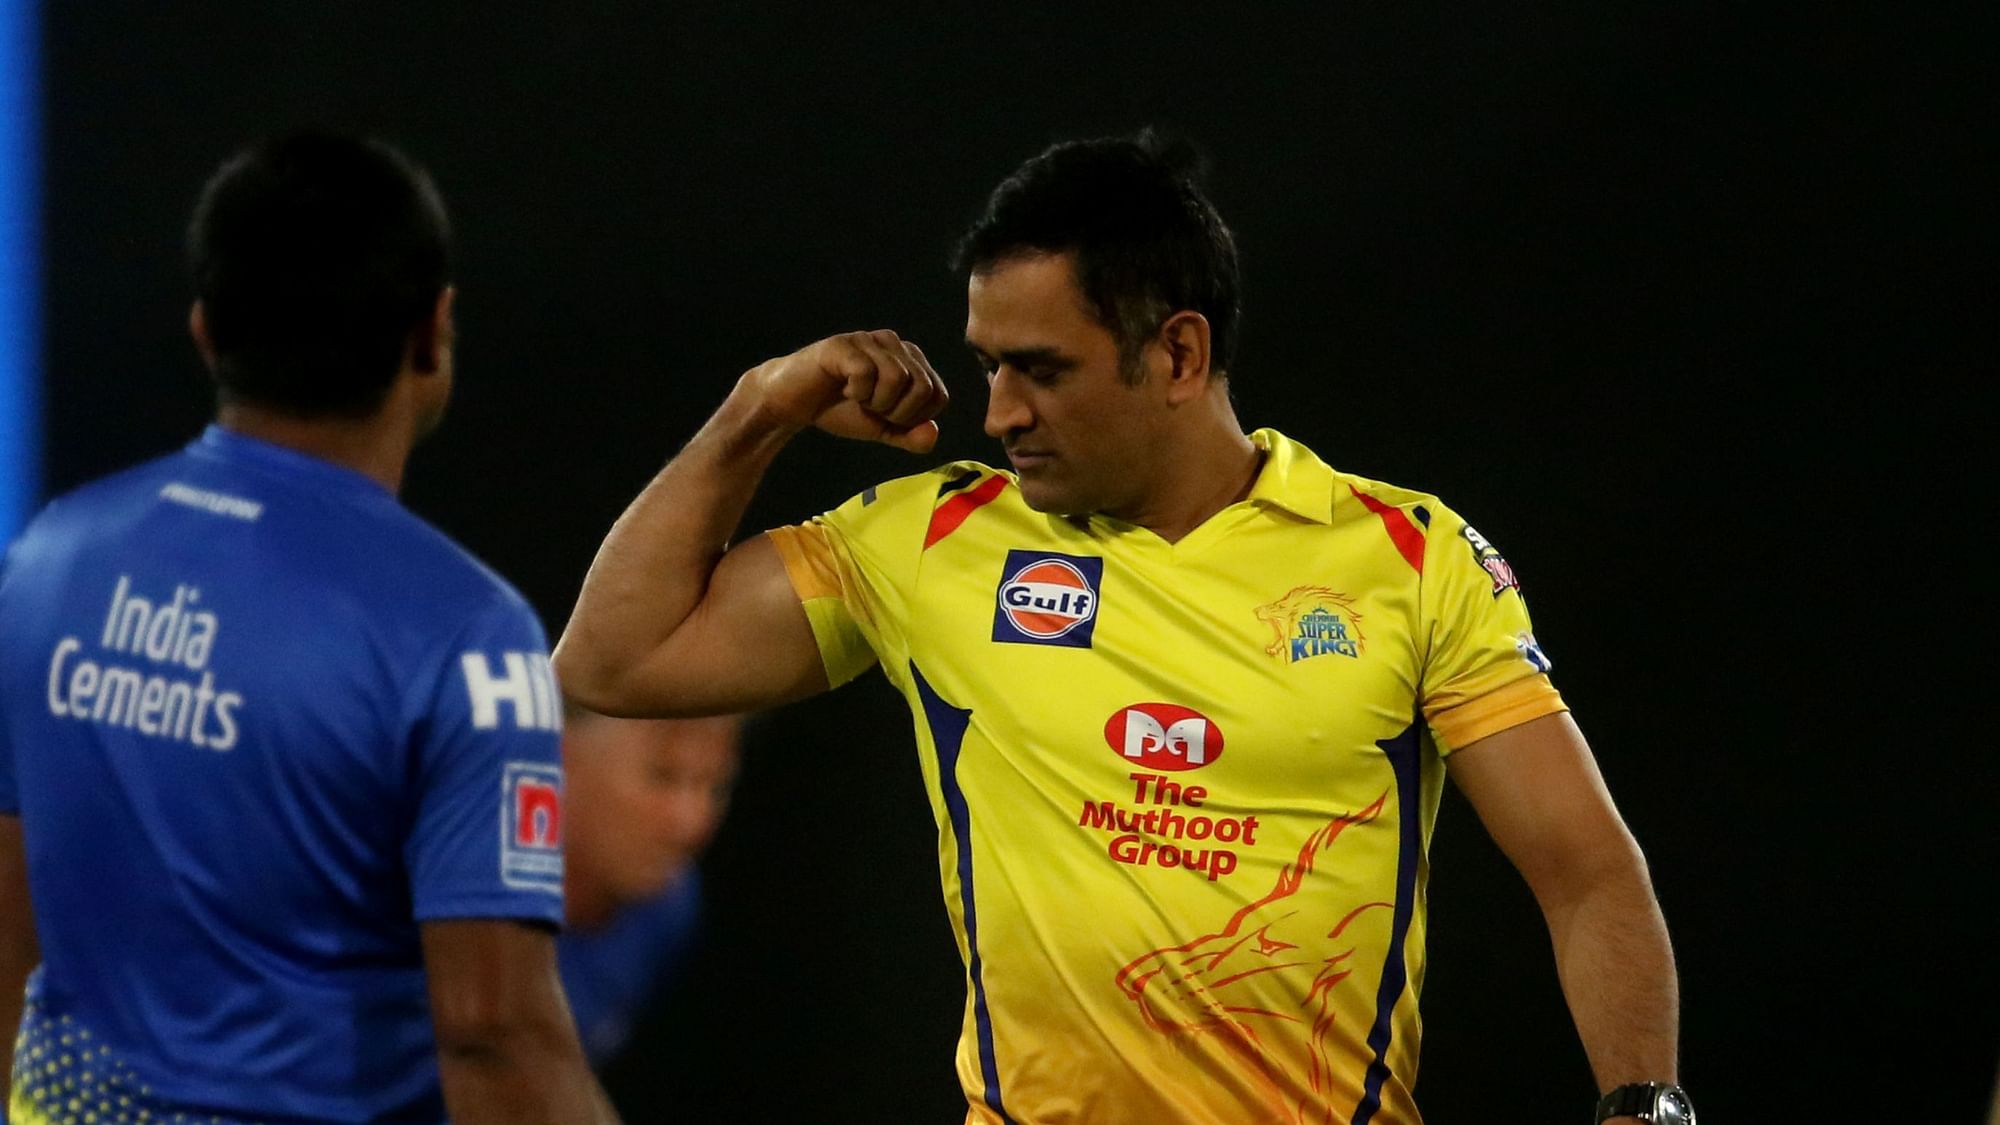 MS Dhoni sat out of the game against Sunrisers Hyderabad nursing a back spasm.